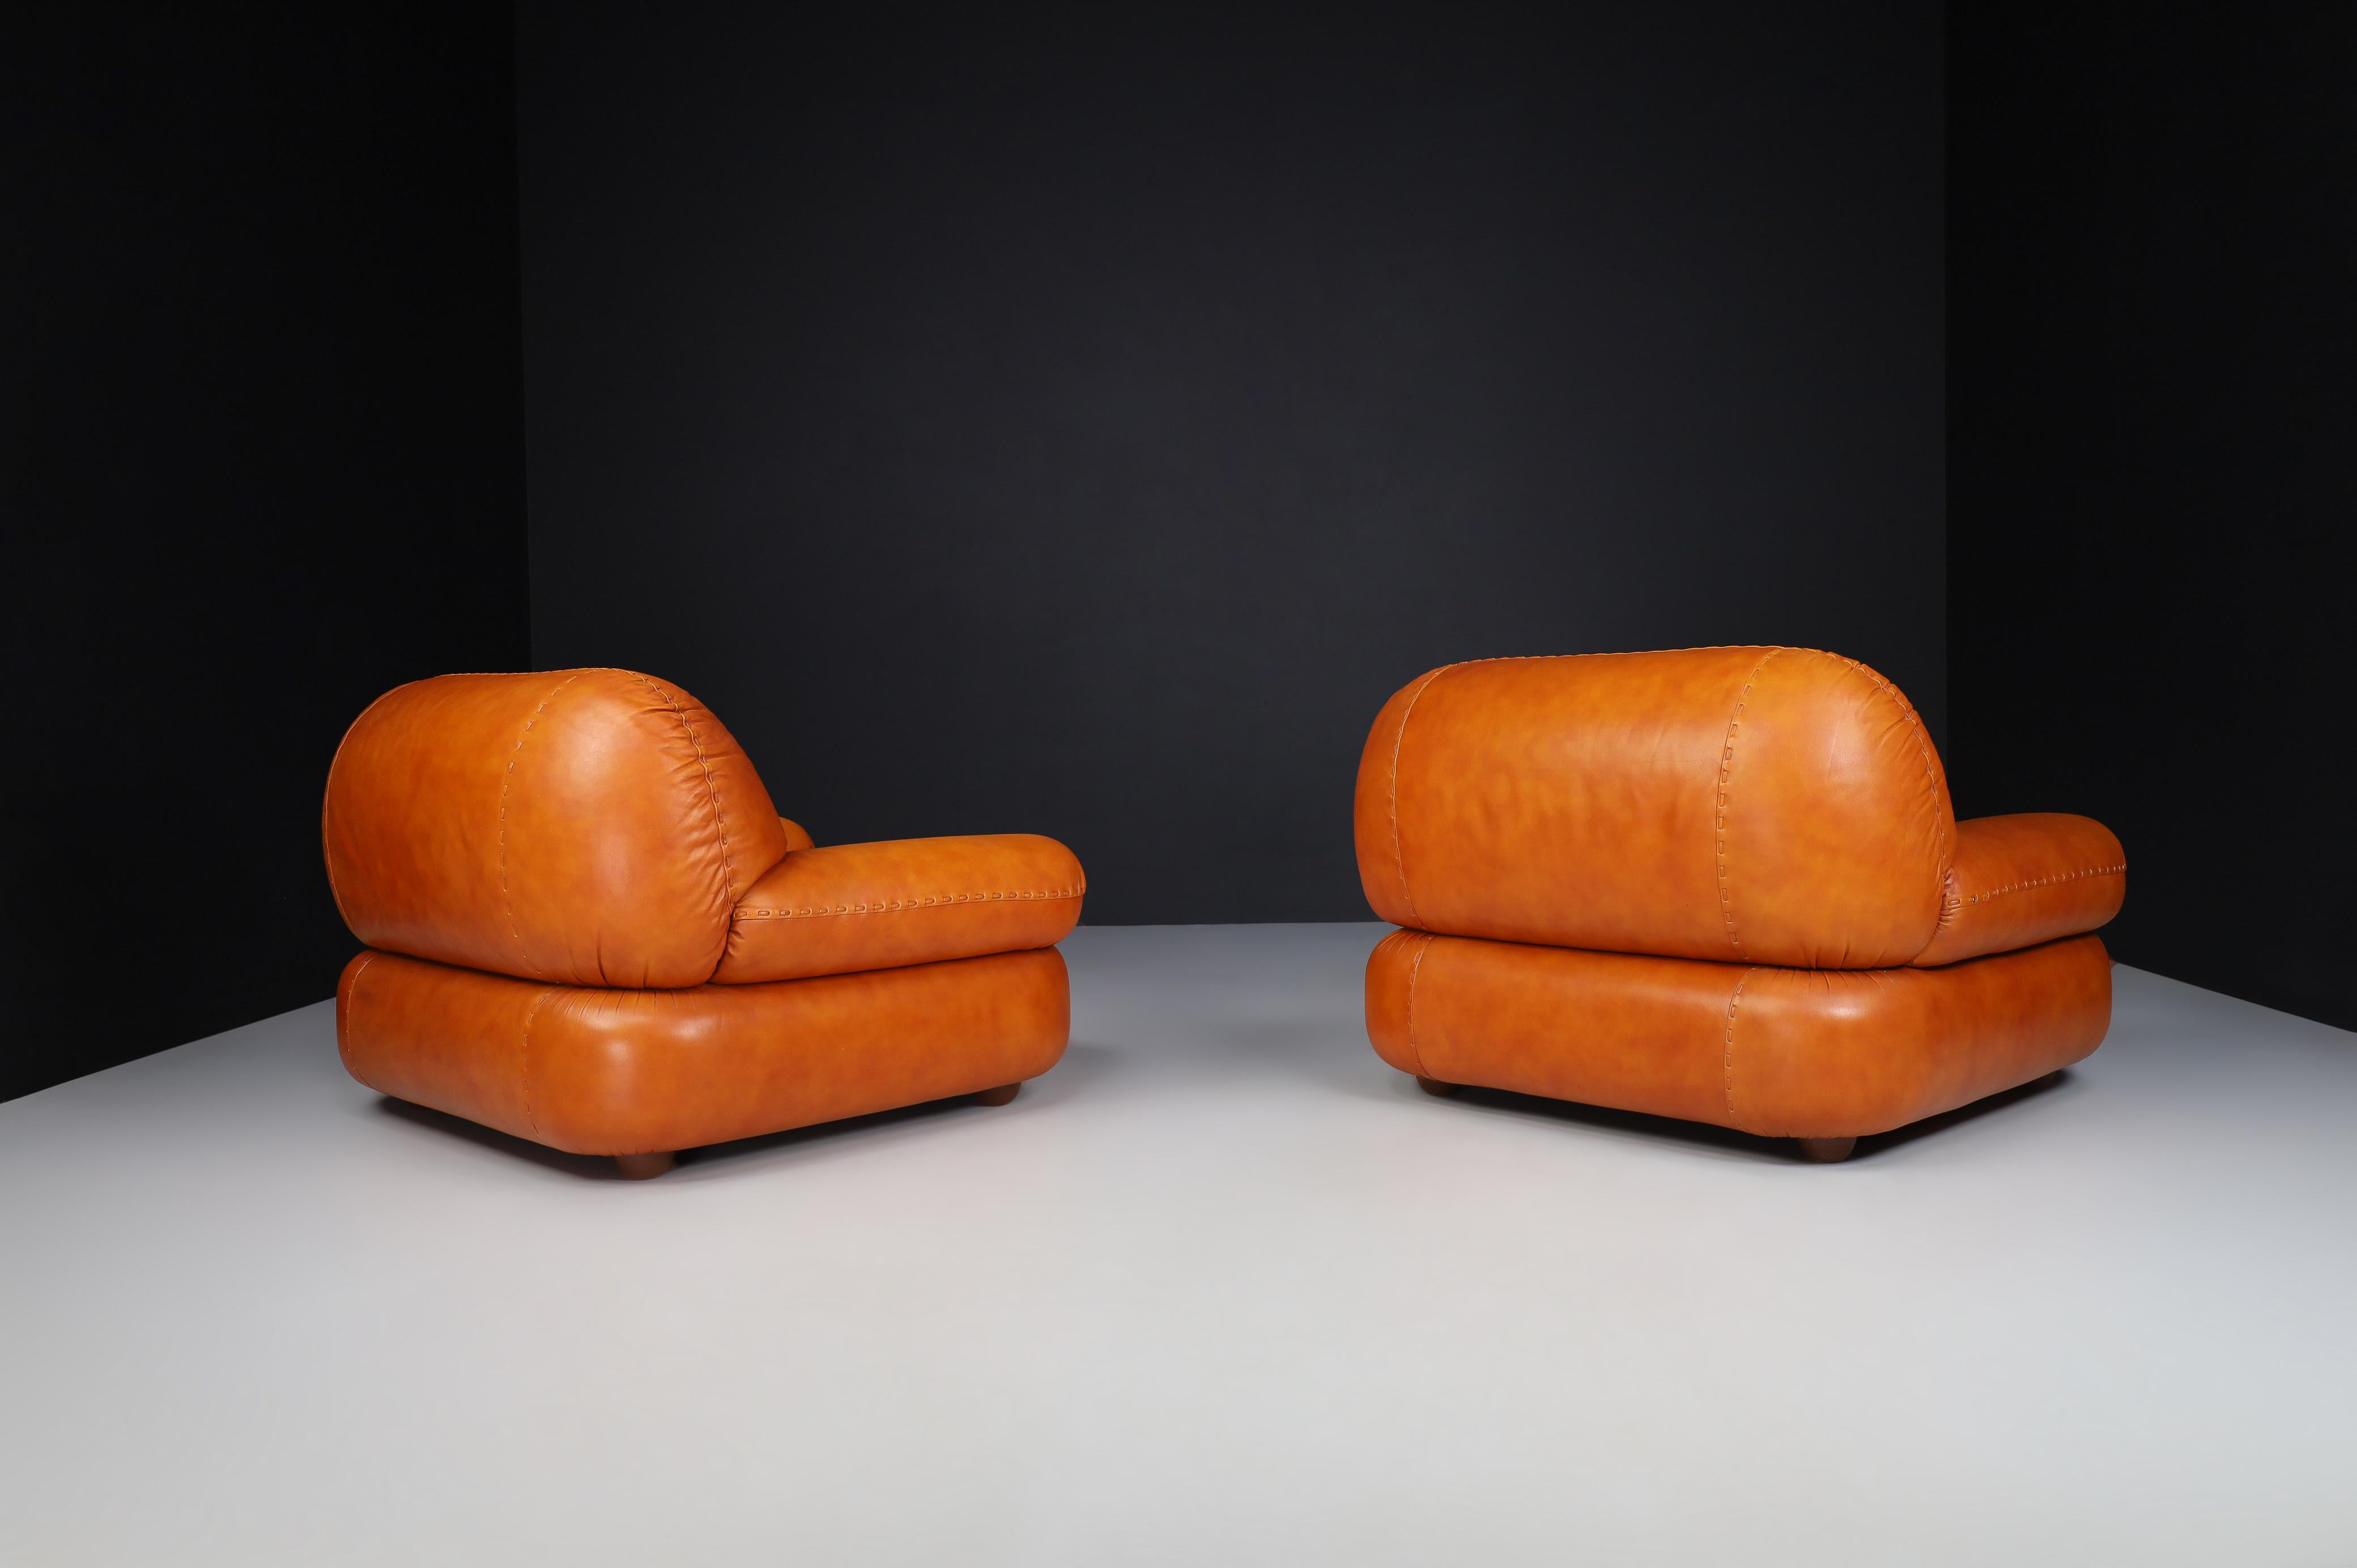 A couple of Lounge chairs in Cognac Leather by Sapporo for Mobil Girgi, Italy 1970

A pair of lounge chairs in cognac leather by Sapporo for Mobil Girgi, Italy, in the 1970s. A couple of big, fluffy, stylish lounge armchairs that feature round